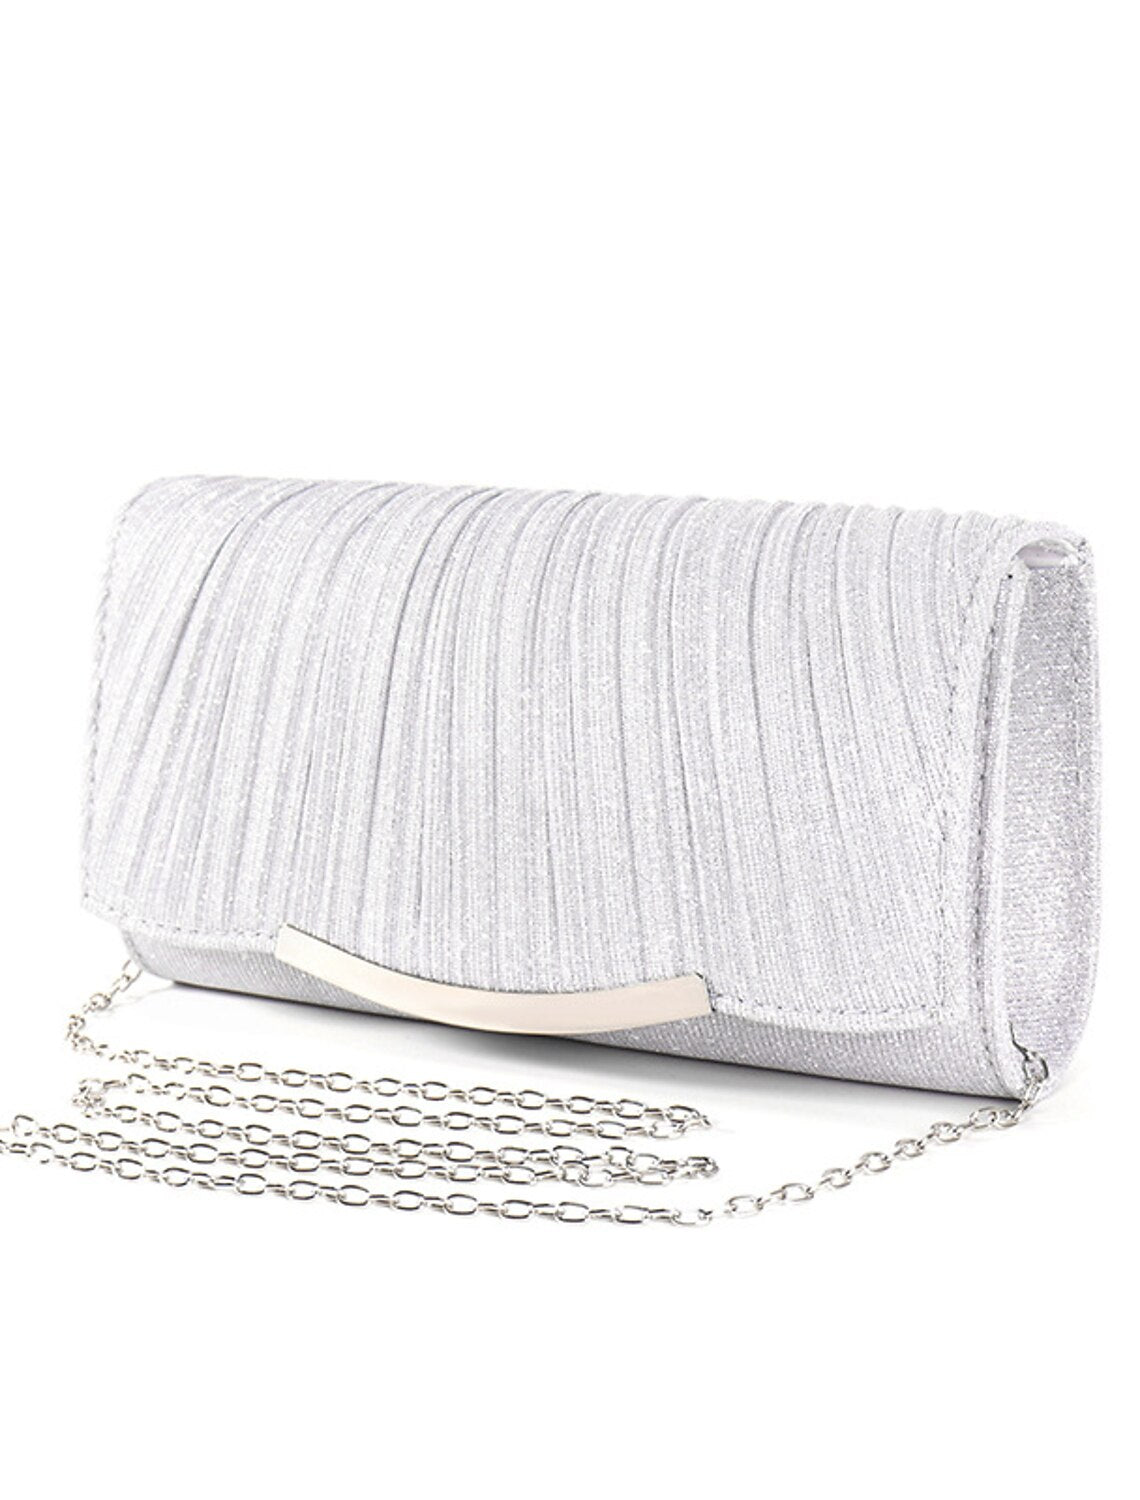 Women's Clutch Evening Bag Wristlet Polyester Party Holiday Buckle Chain Large Capacity Lightweight Durable Solid Color Silver Champagne